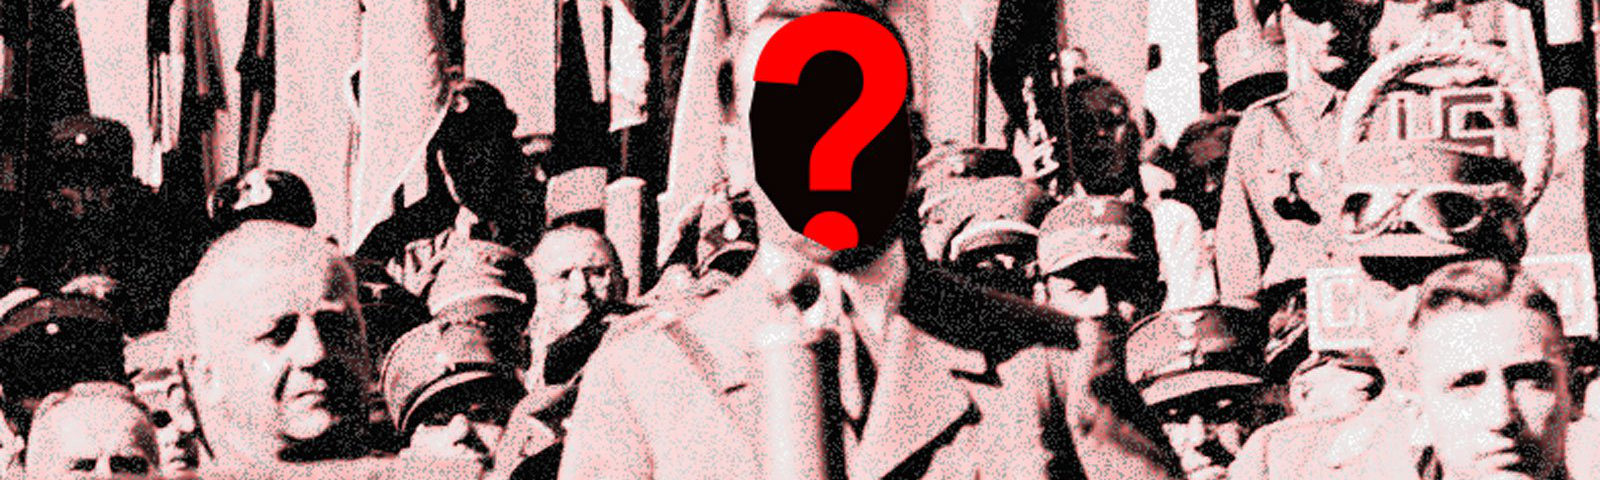 Still of a Youtube video of Hitler speaking at a rally, but with his face obscured by a black shape and a red question mark.